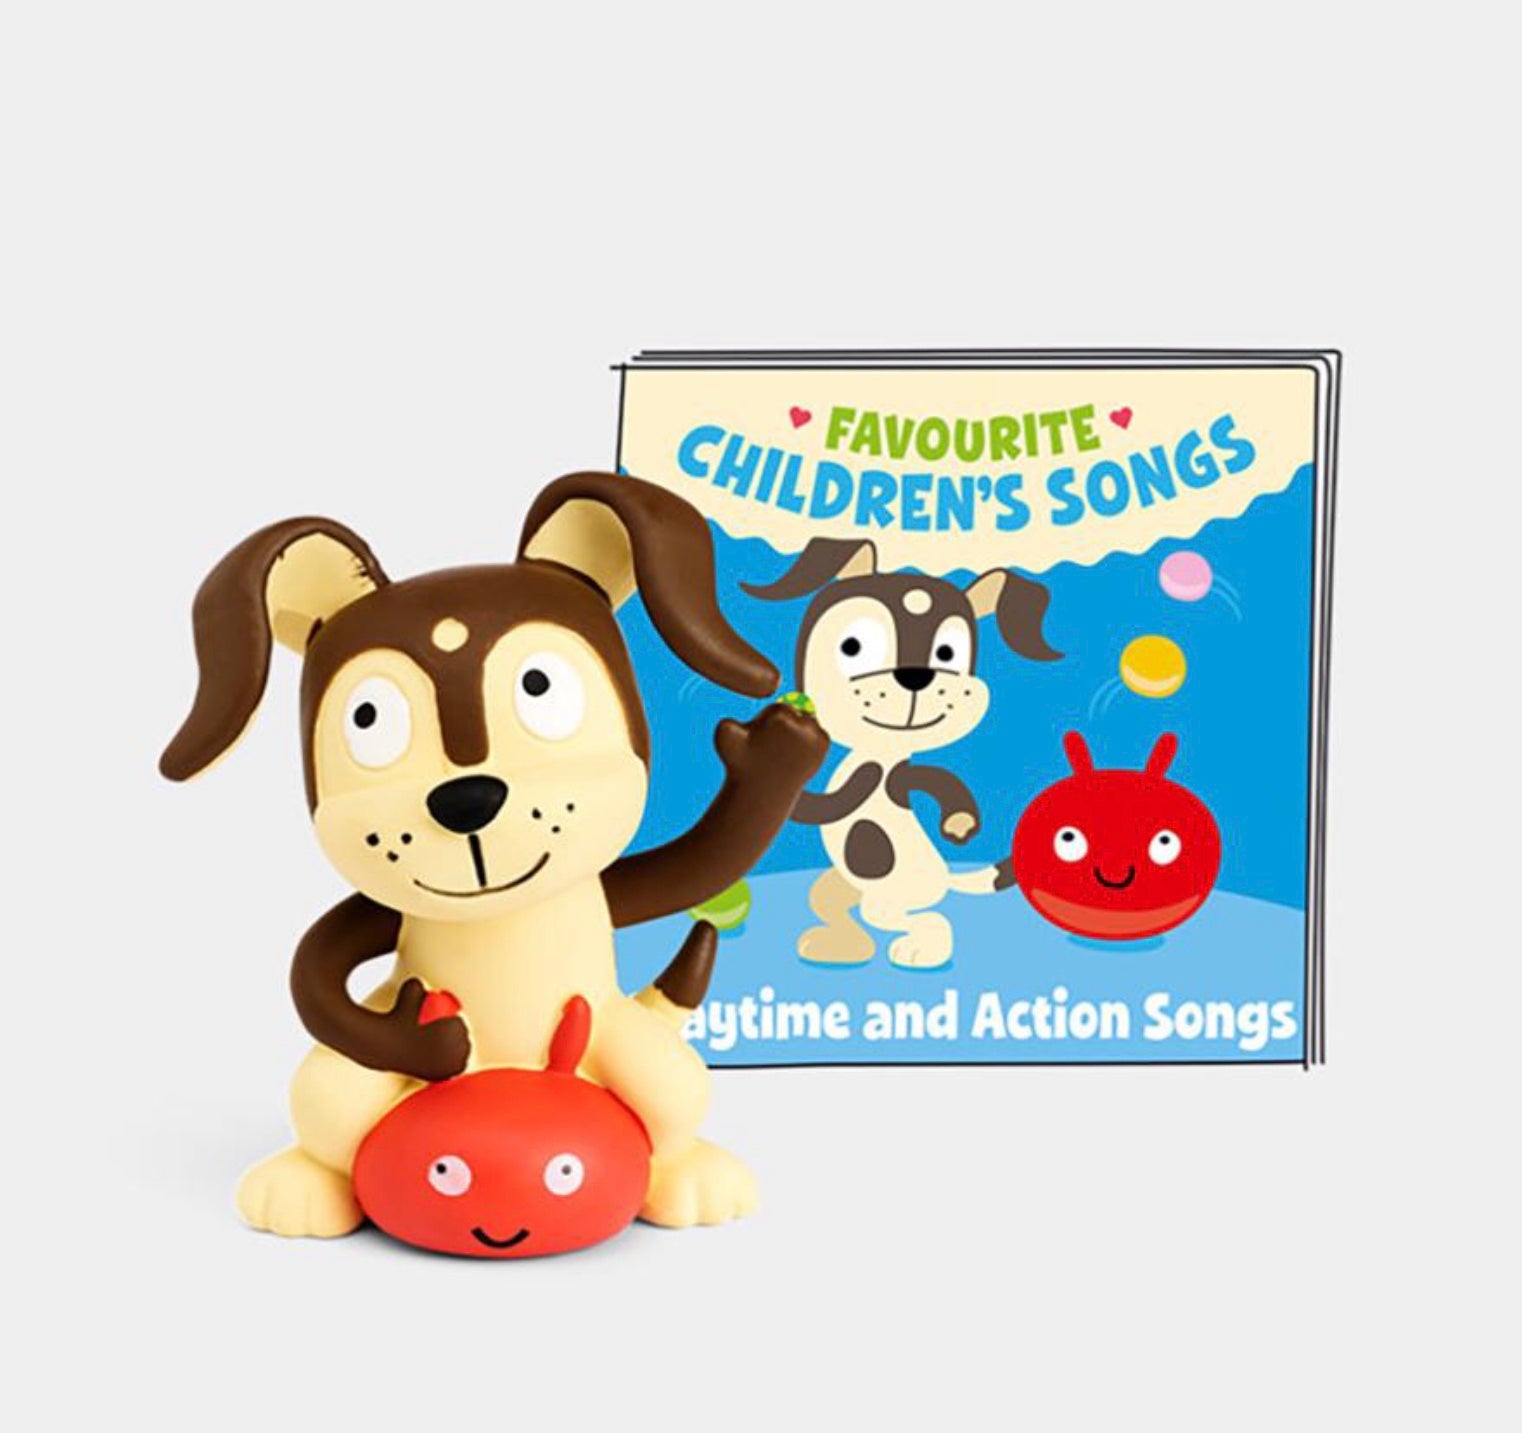 Tonies Playtime and Action Songs Character